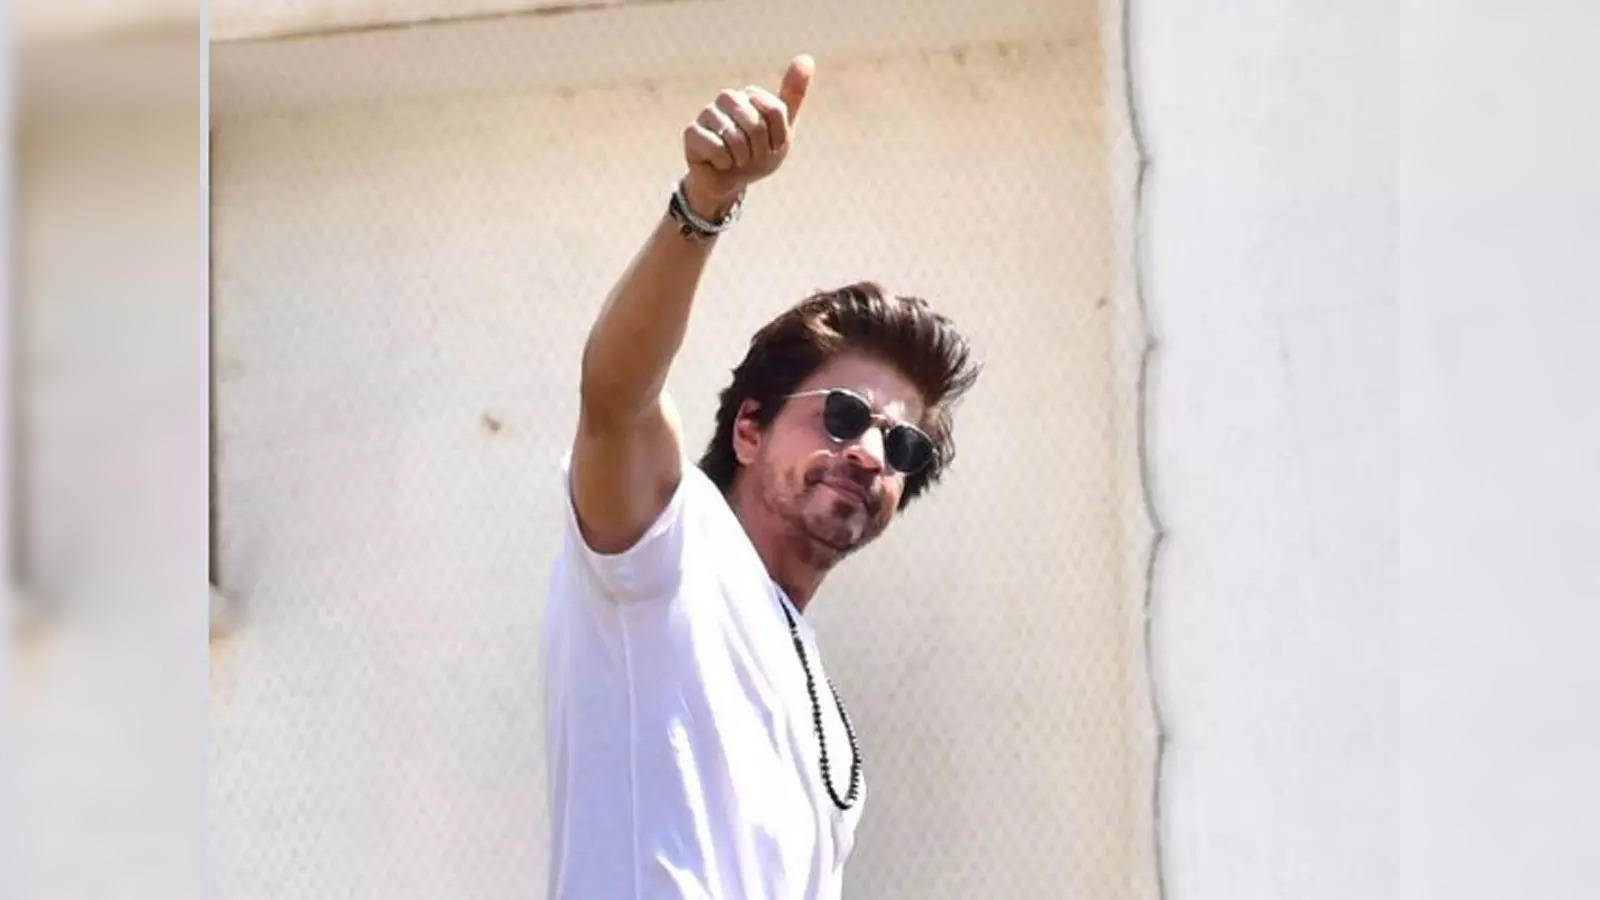 On 53rd birthday, Shah Rukh Khan greets fans with his signature pose - The  Statesman